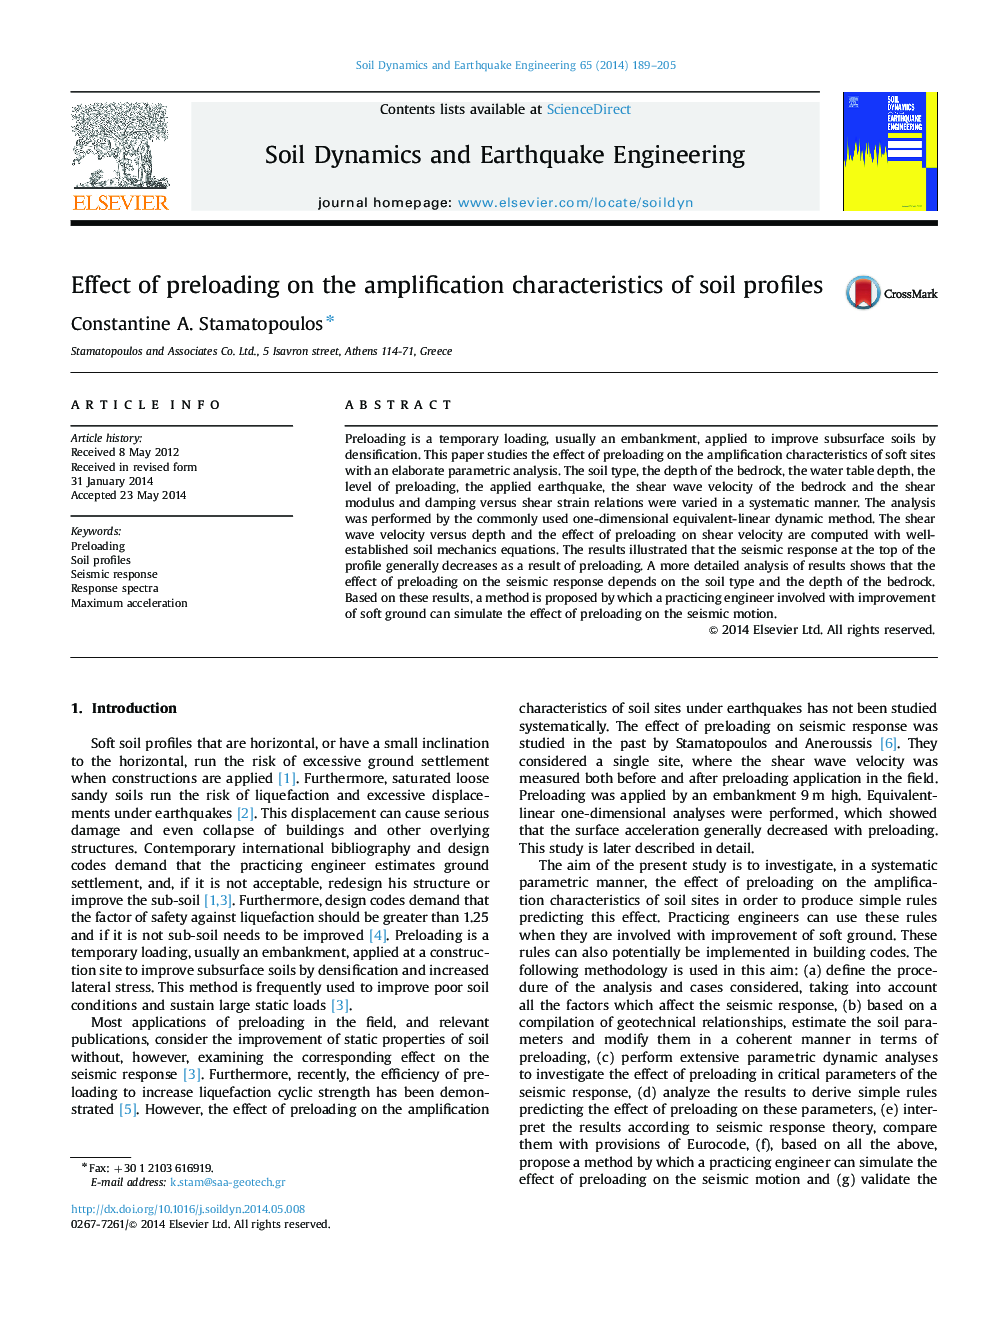 Effect of preloading on the amplification characteristics of soil profiles